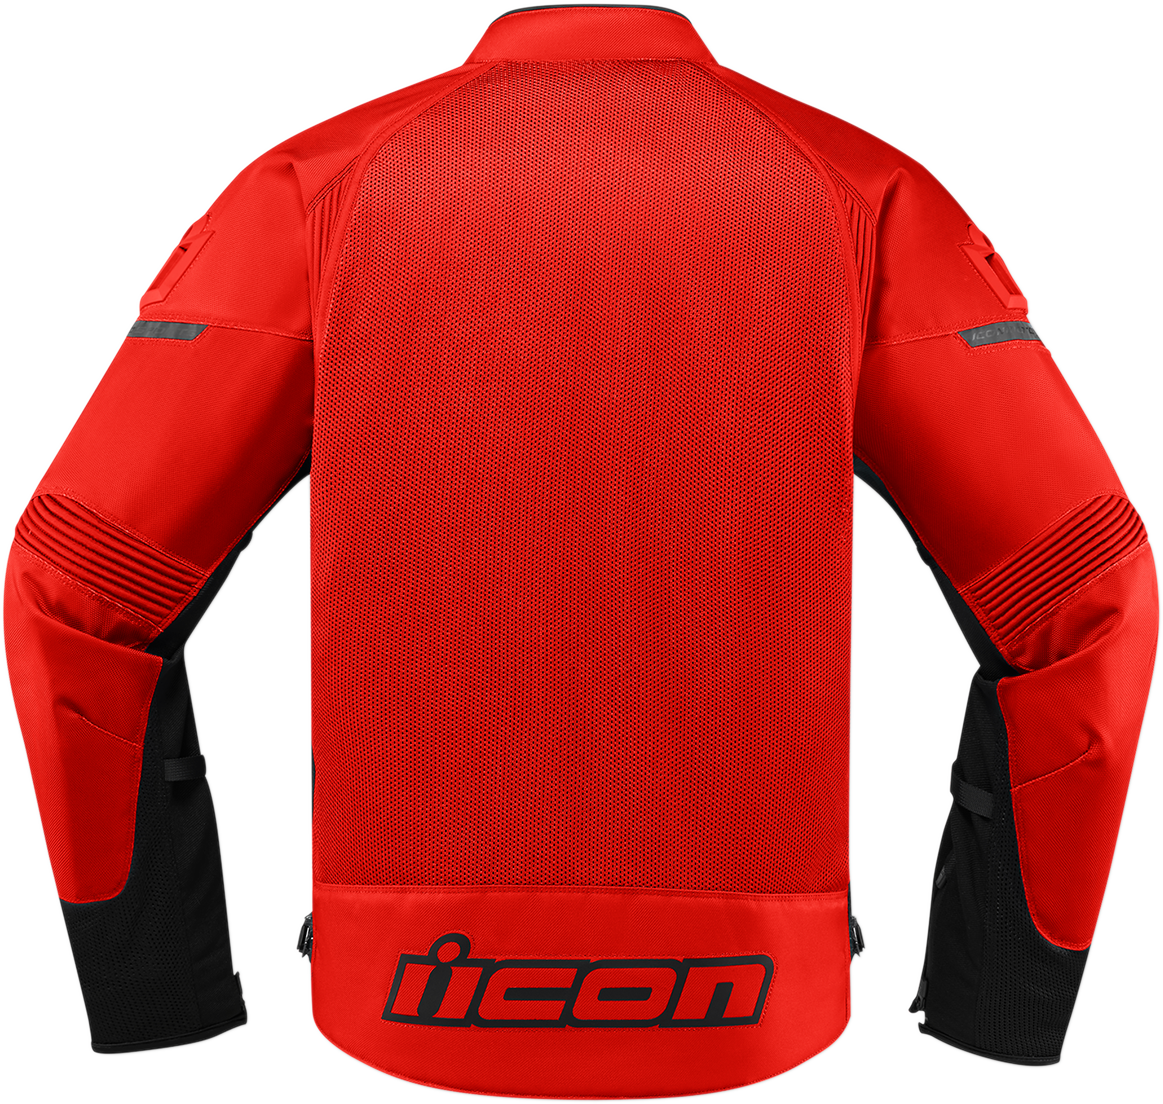 ICON Contra2™ Jacket - Red - Large 2820-4773